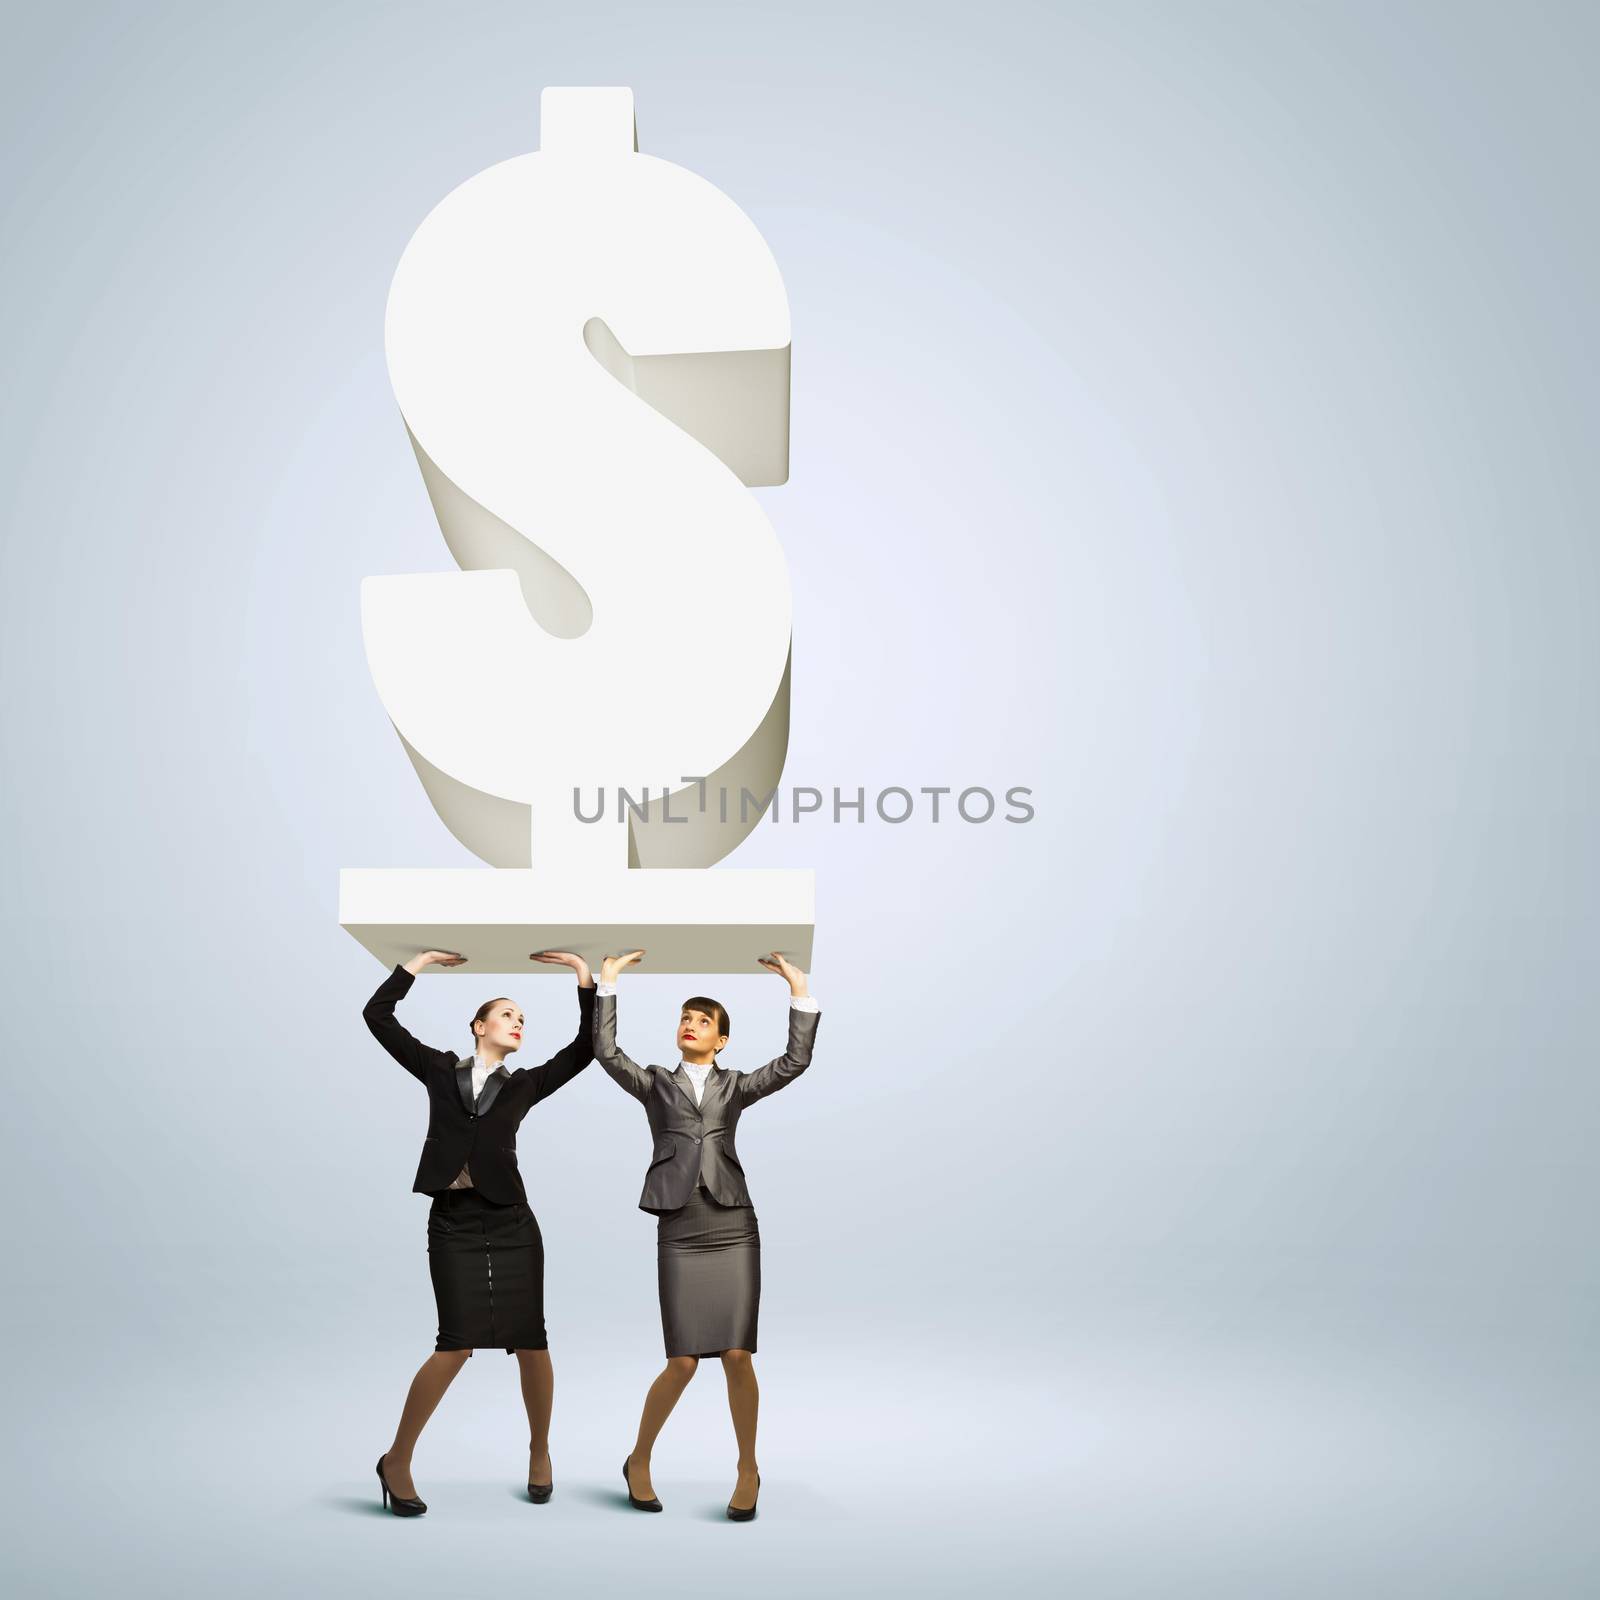 Image of two businesswomen holding dollar sign above head